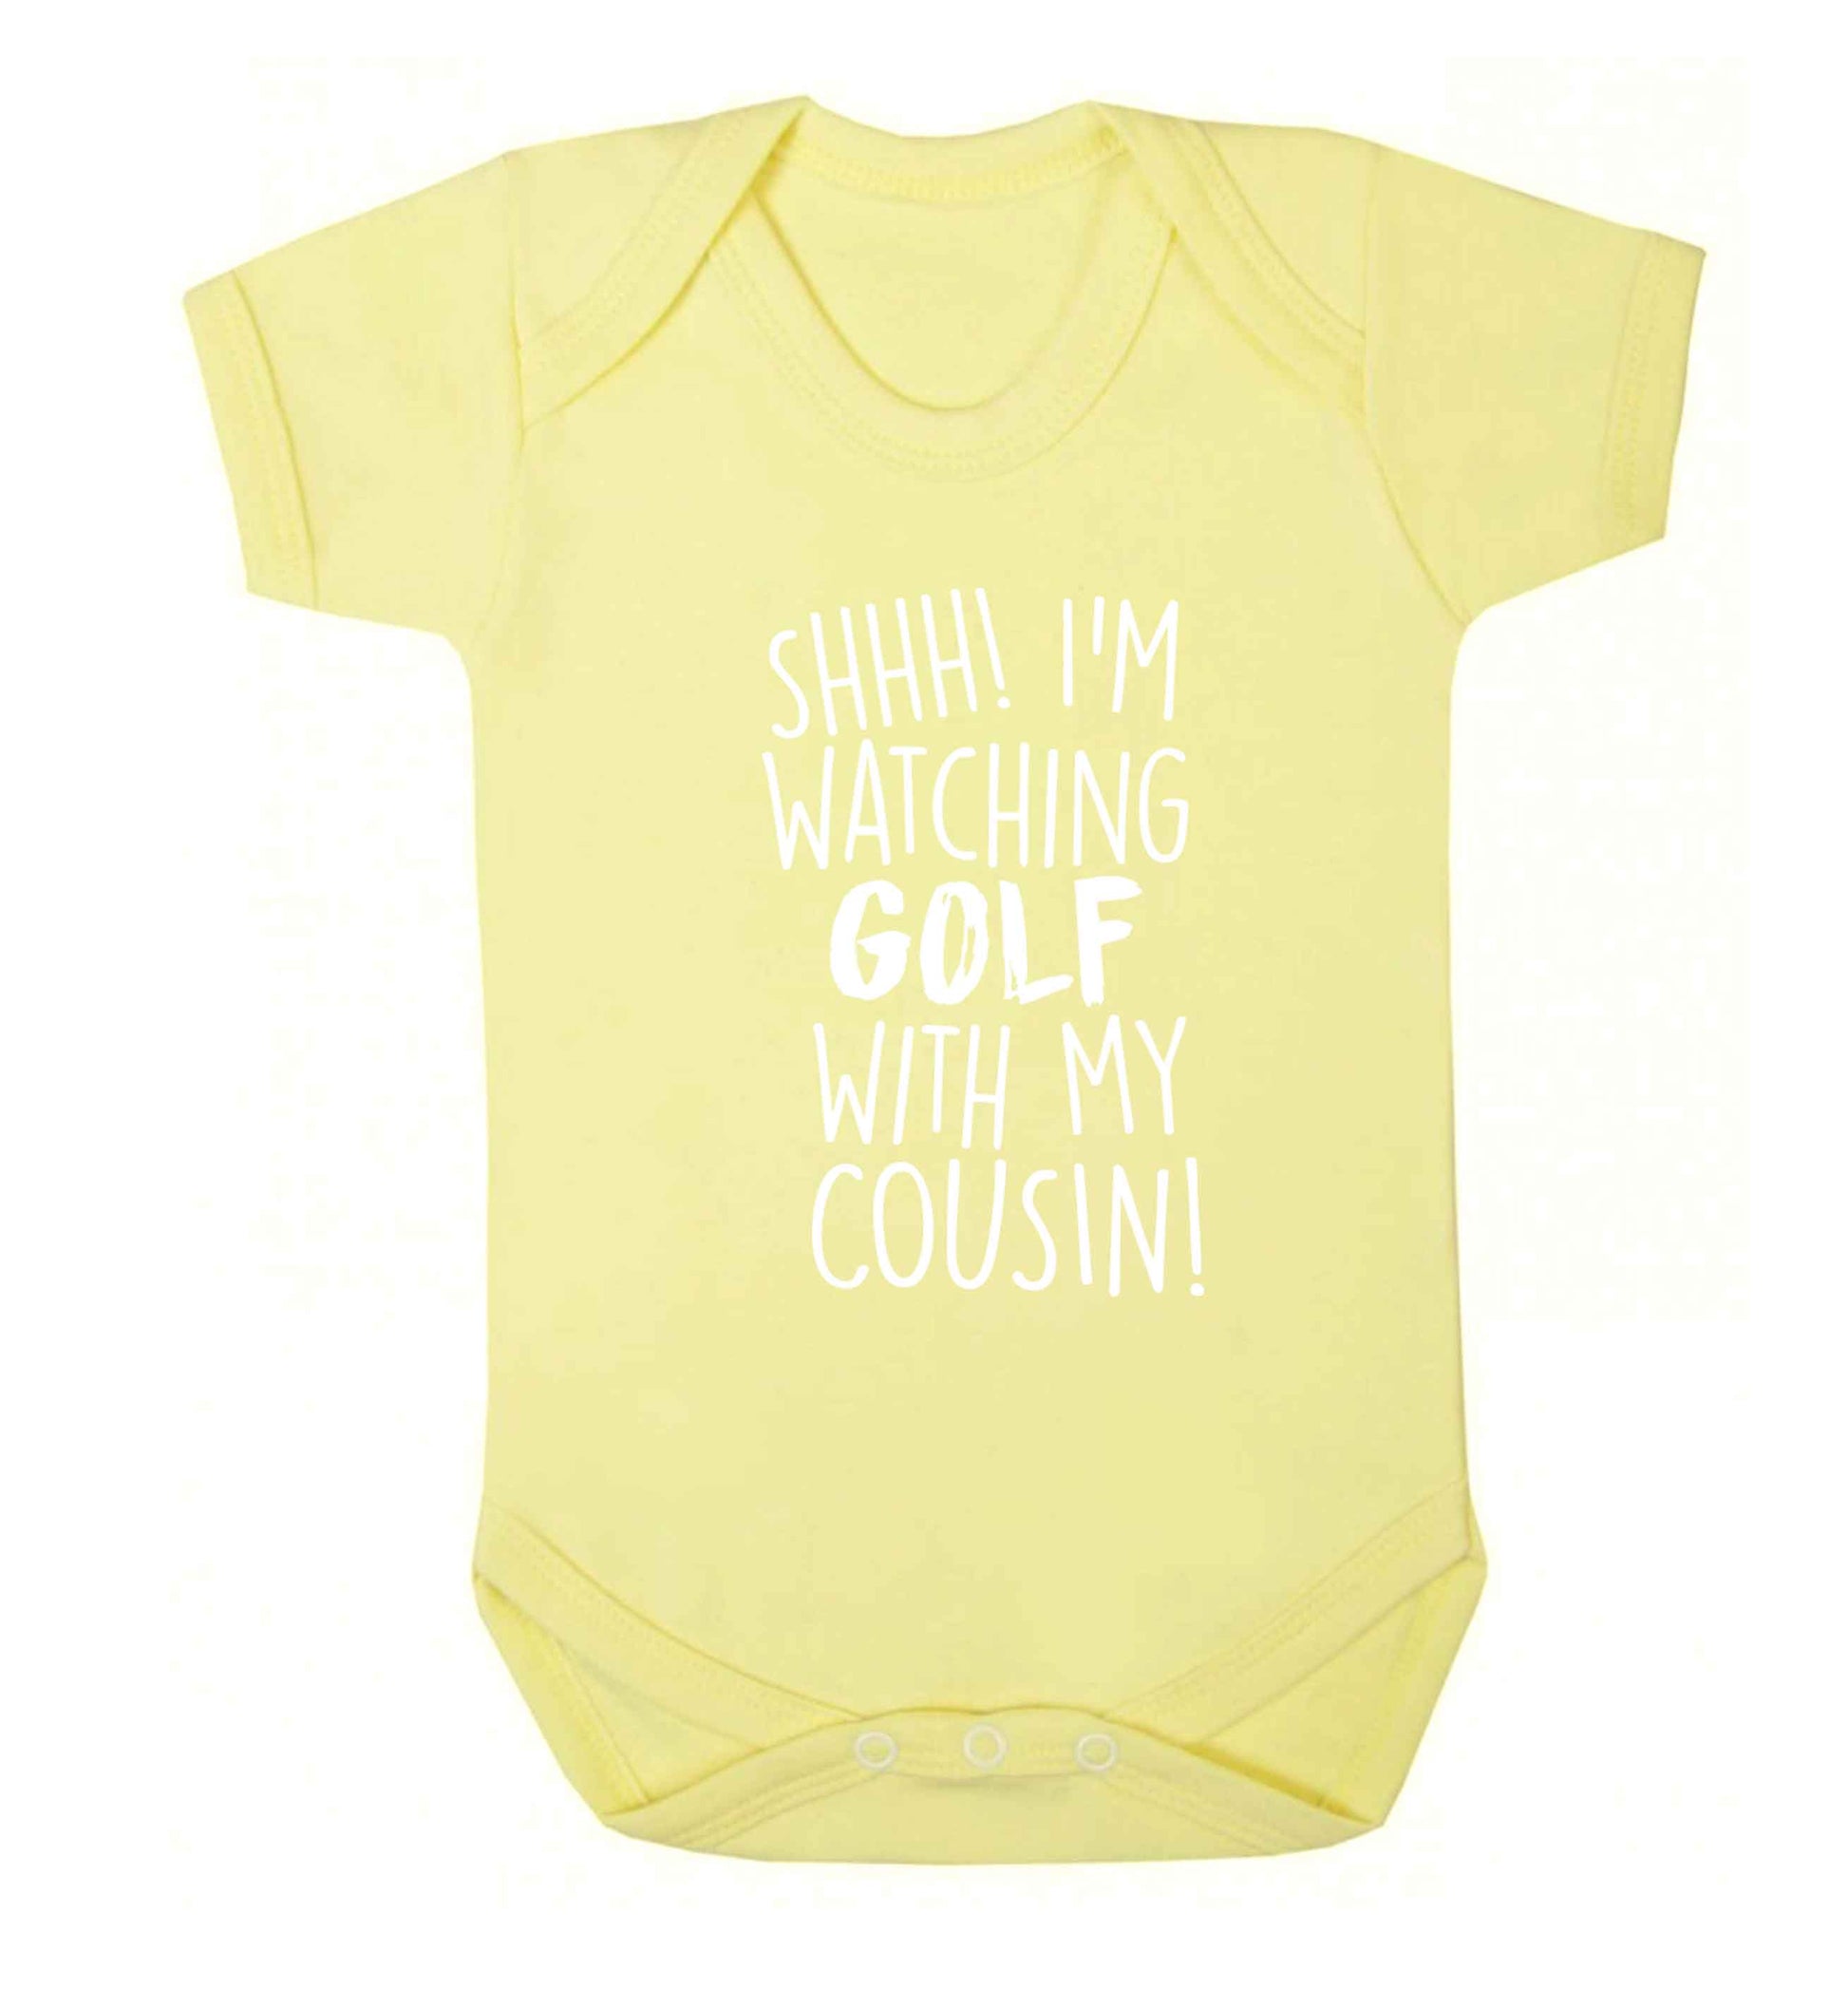 Shh I'm watching golf with my cousin Baby Vest pale yellow 18-24 months